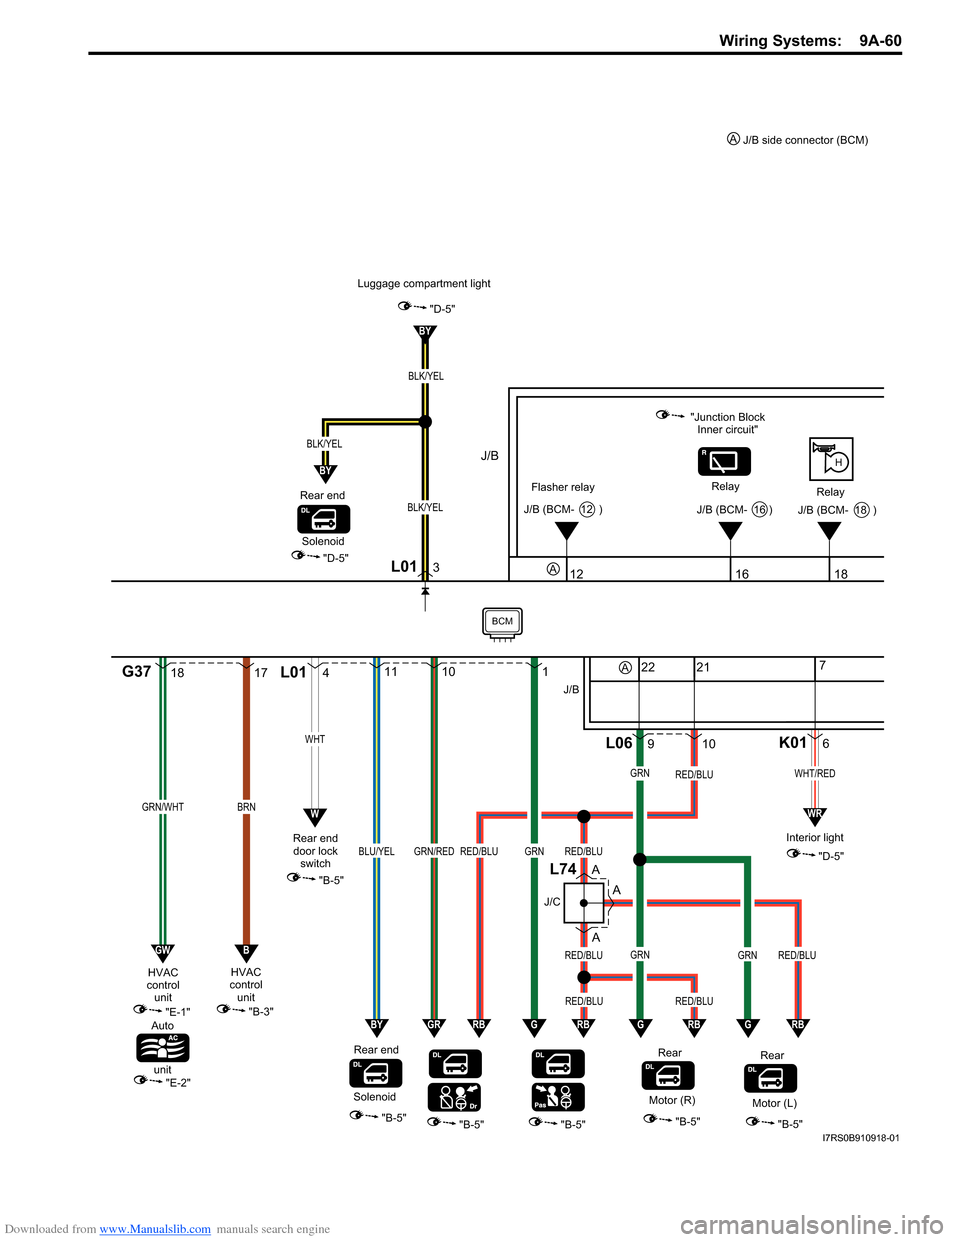 SUZUKI SWIFT 2008 2.G Service User Guide Downloaded from www.Manualslib.com manuals search engine Wiring Systems:  9A-60
1817
GRN/WHTBRN
"E-1"
"E-2"
HVAC
control unit
Auto
unit
G37
Flasher relay Relay
Relay
H
12
"Junction Block
Inner circuit